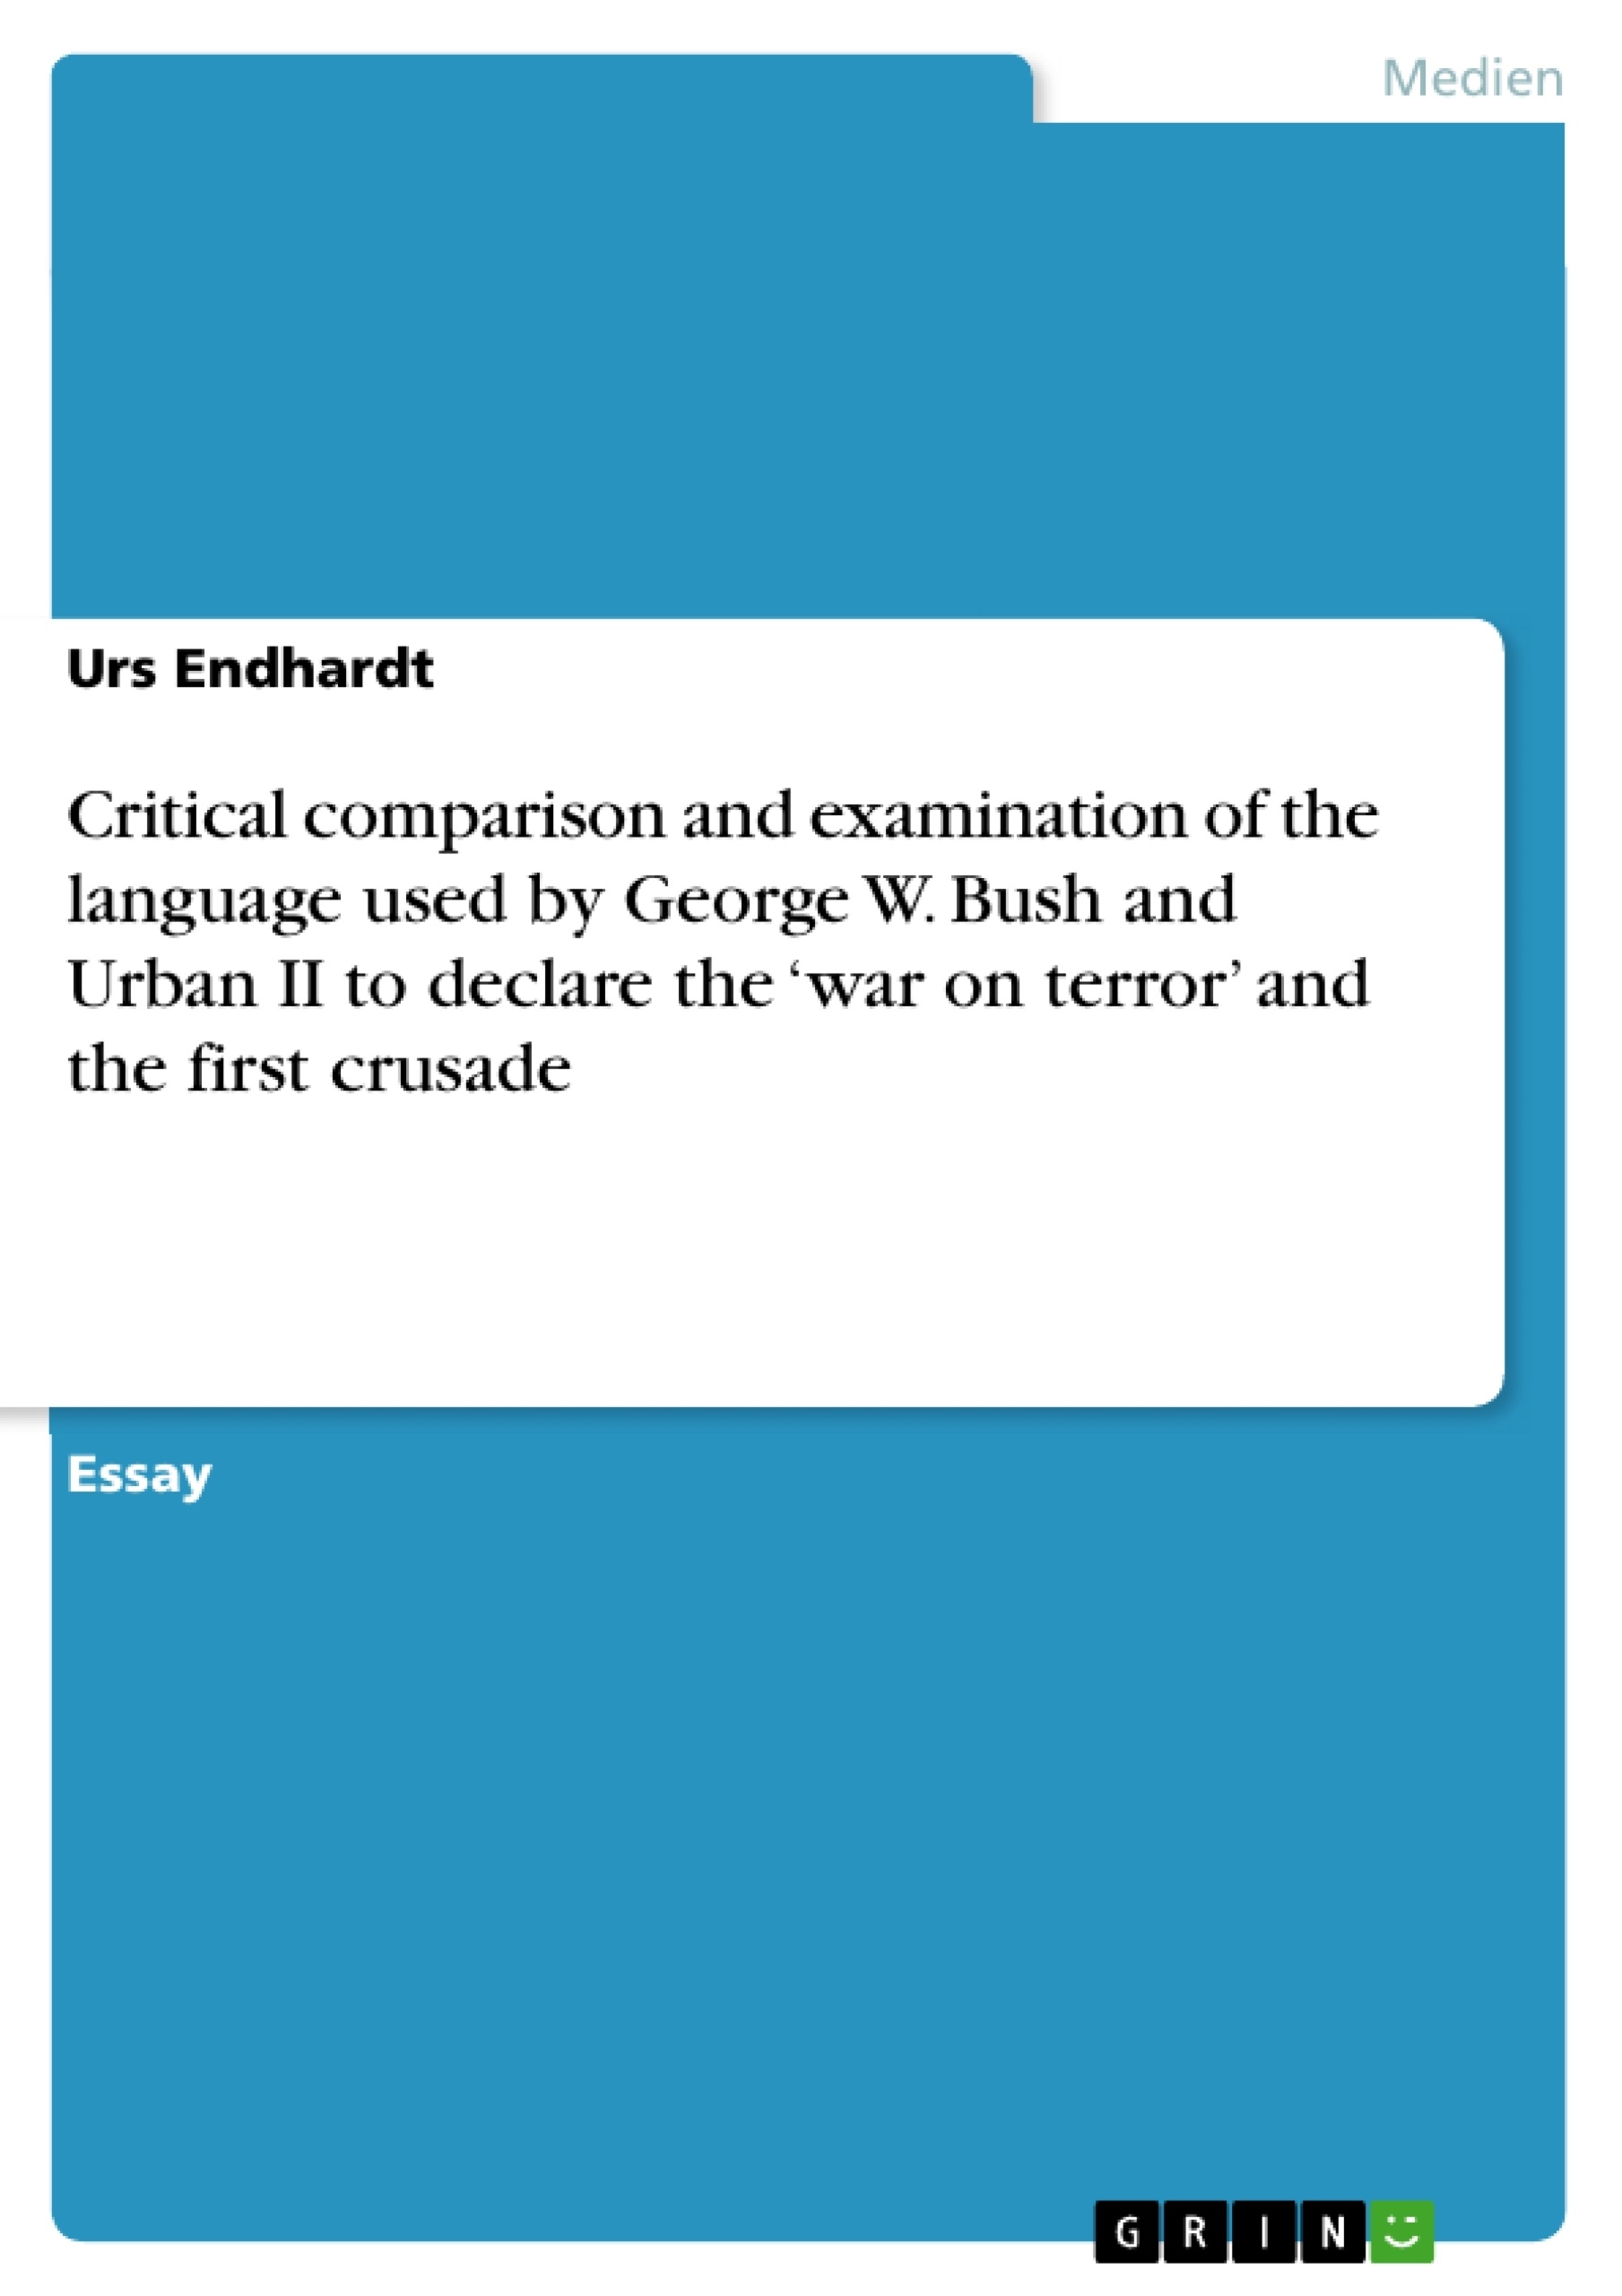 Título: Critical comparison and examination of the language used by George W. Bush and Urban II to declare the ‘war on terror’ and the first crusade